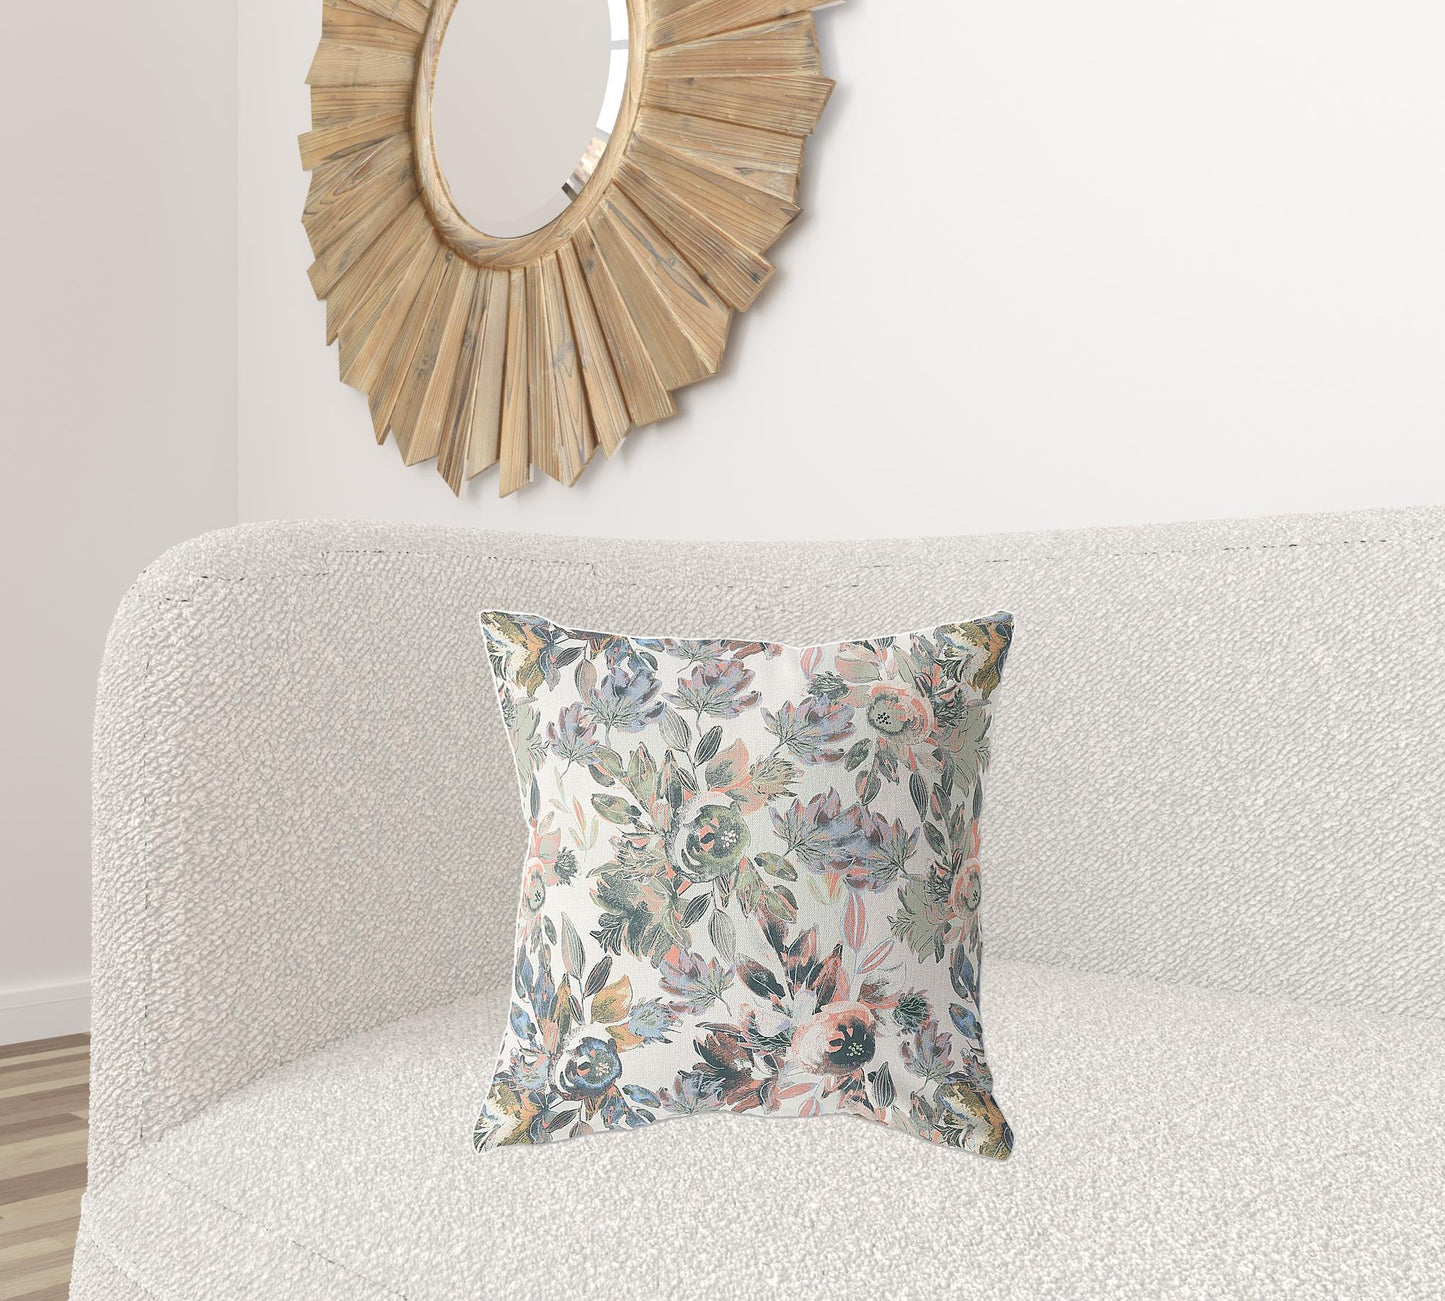 18" X 18" White, Pink And Grey Broadcloth Floral Throw Pillow